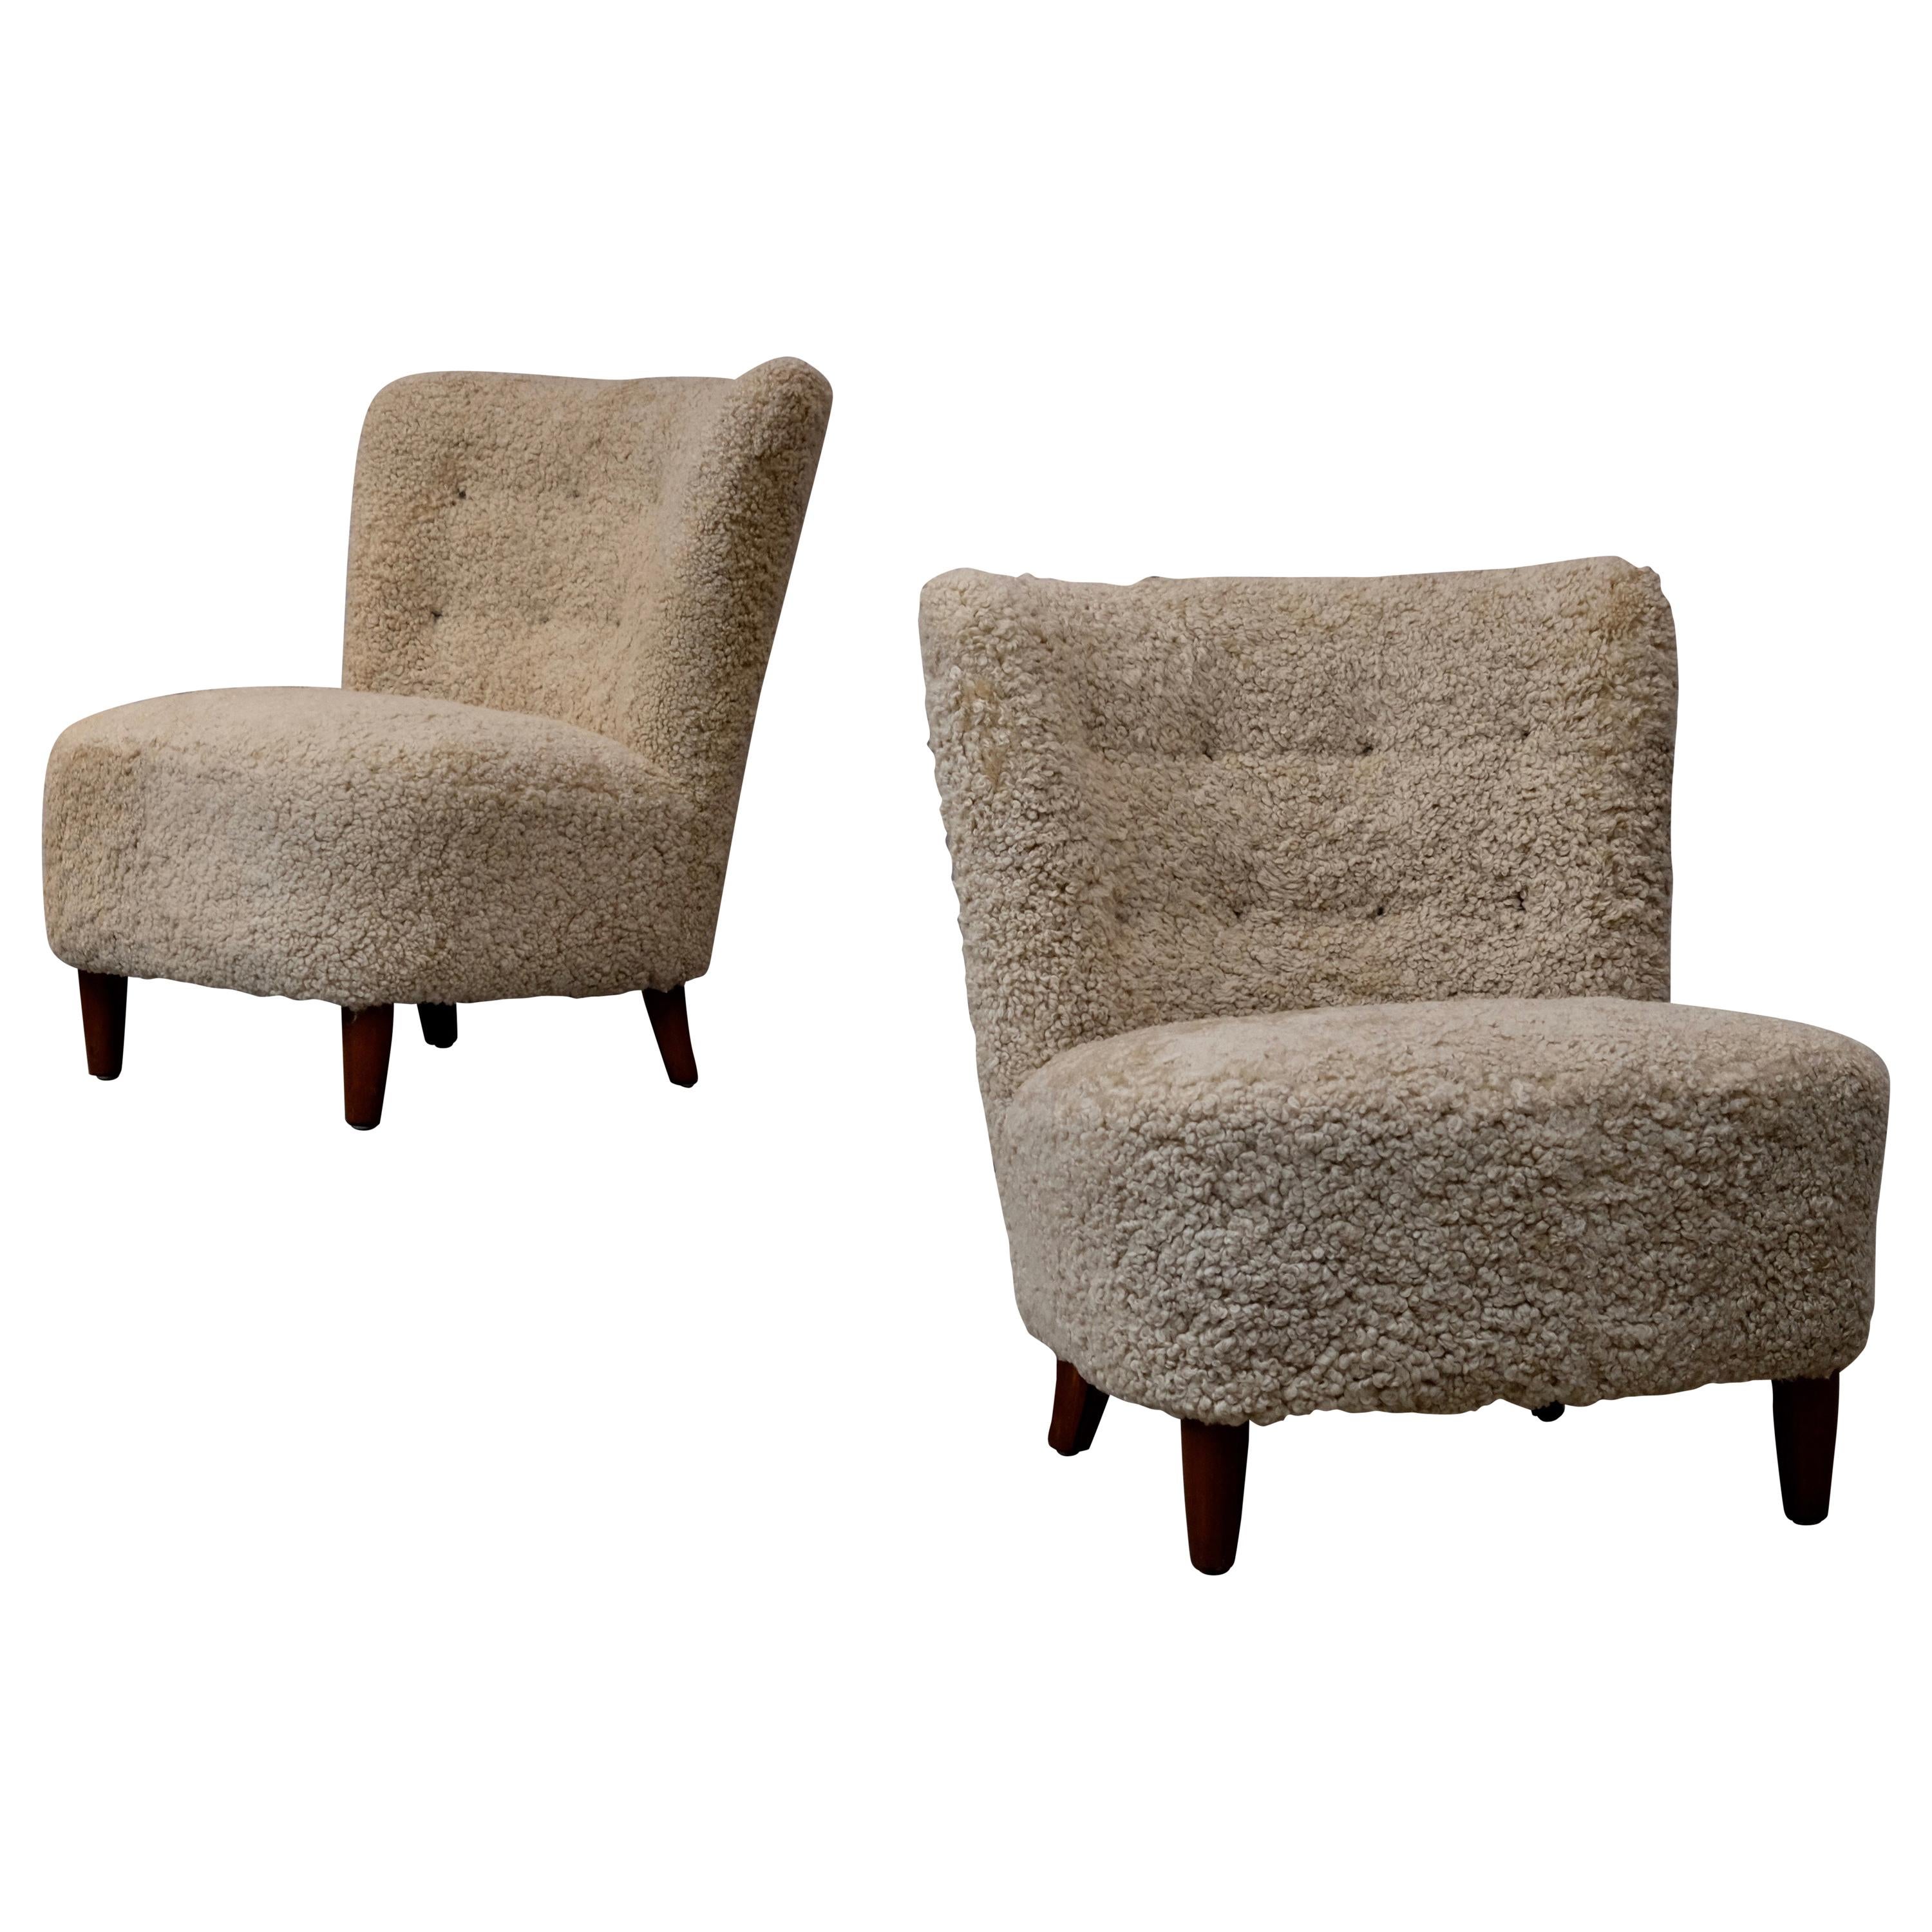 Pair of Swedish Easy Chairs, 1950s